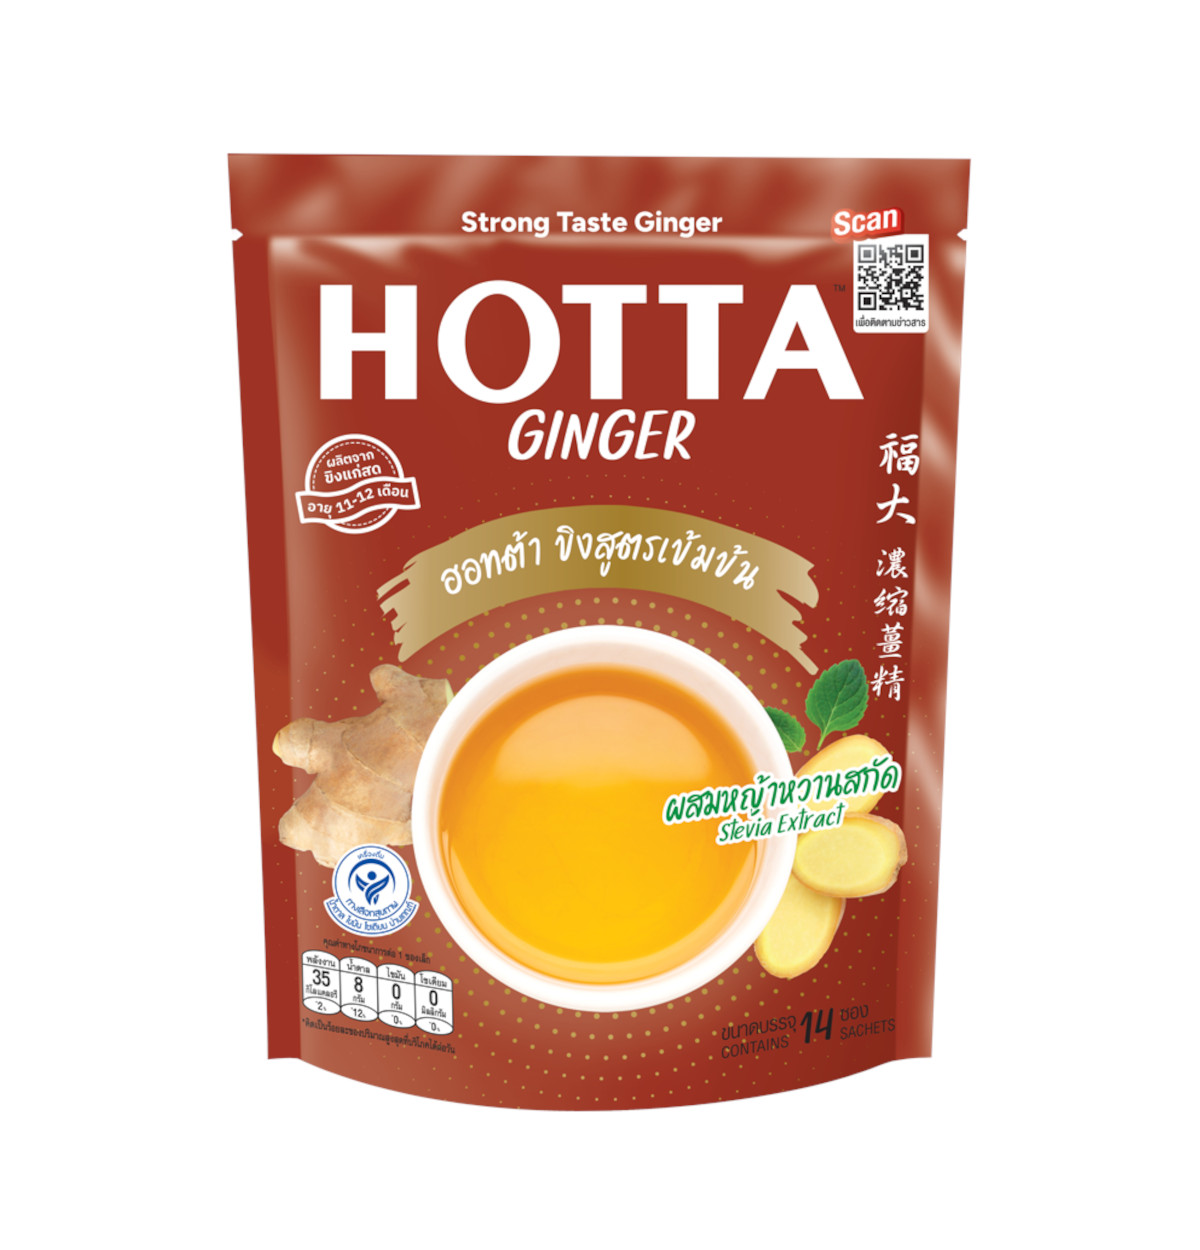 HOTTA Instant Ginger with Stevia Extract Strong Taste Formula 9g.x14 Sachets